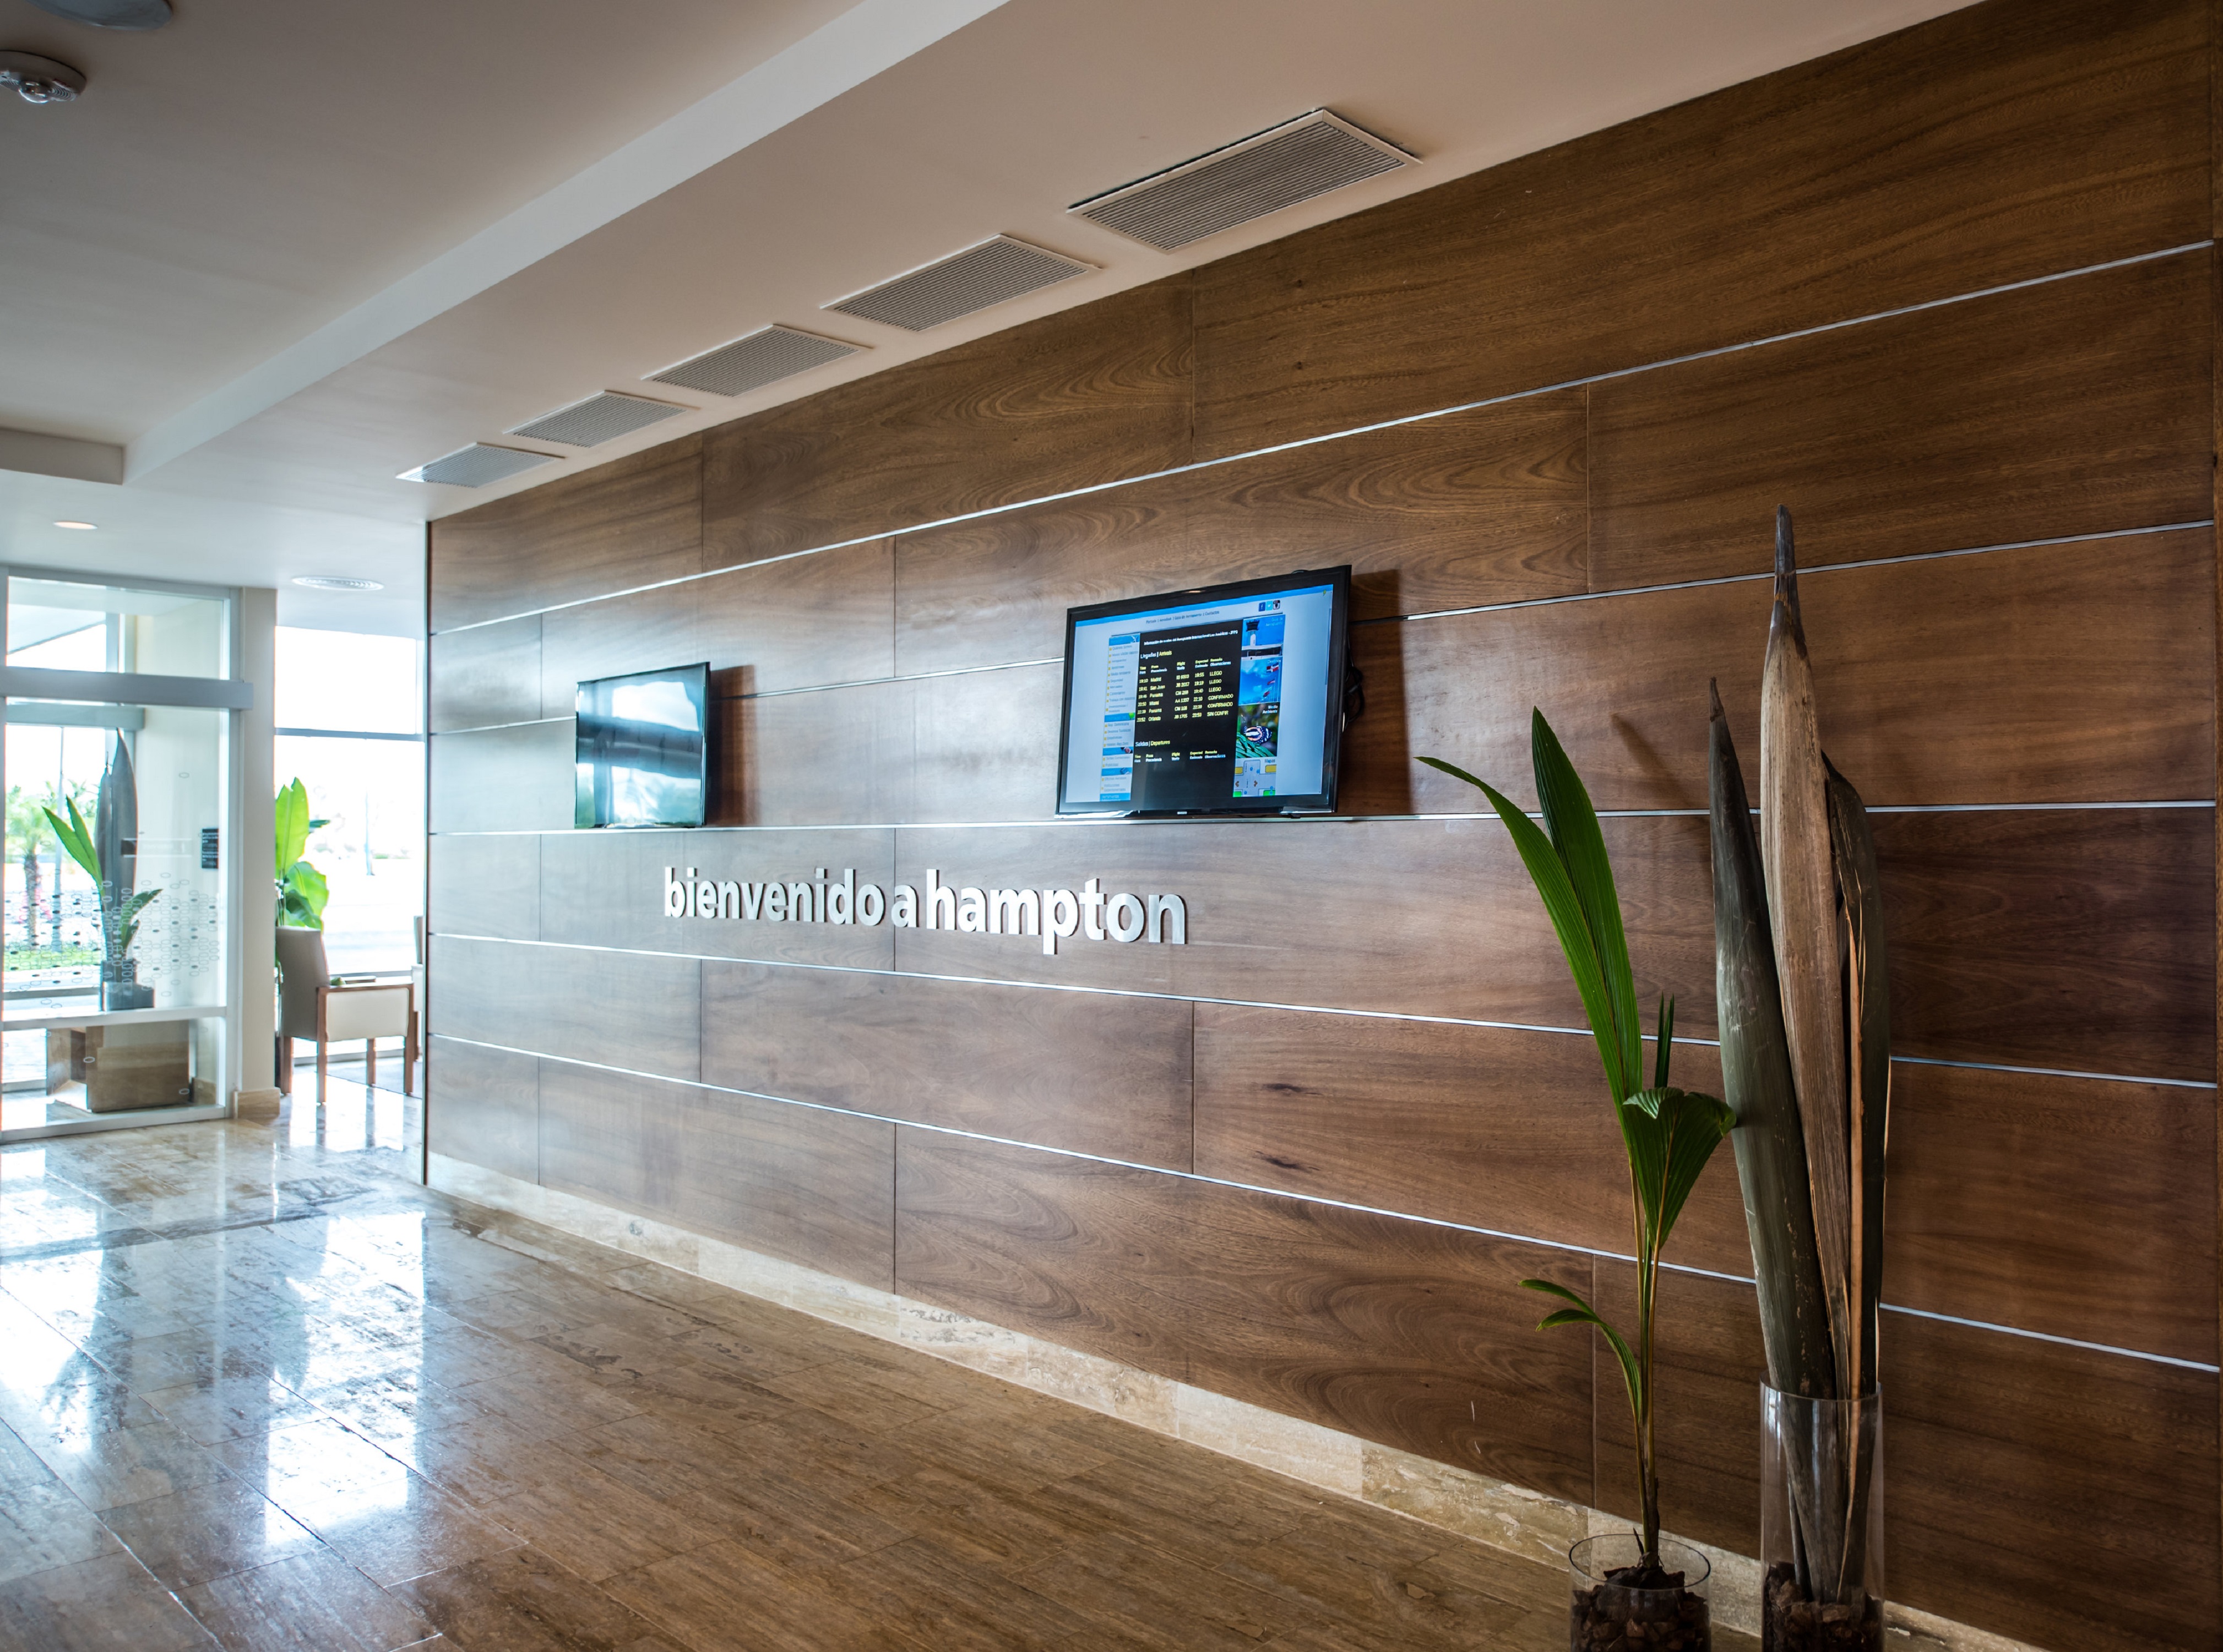 Hotel Lobby Entrance Area with Two Wall Mounted HDTVs